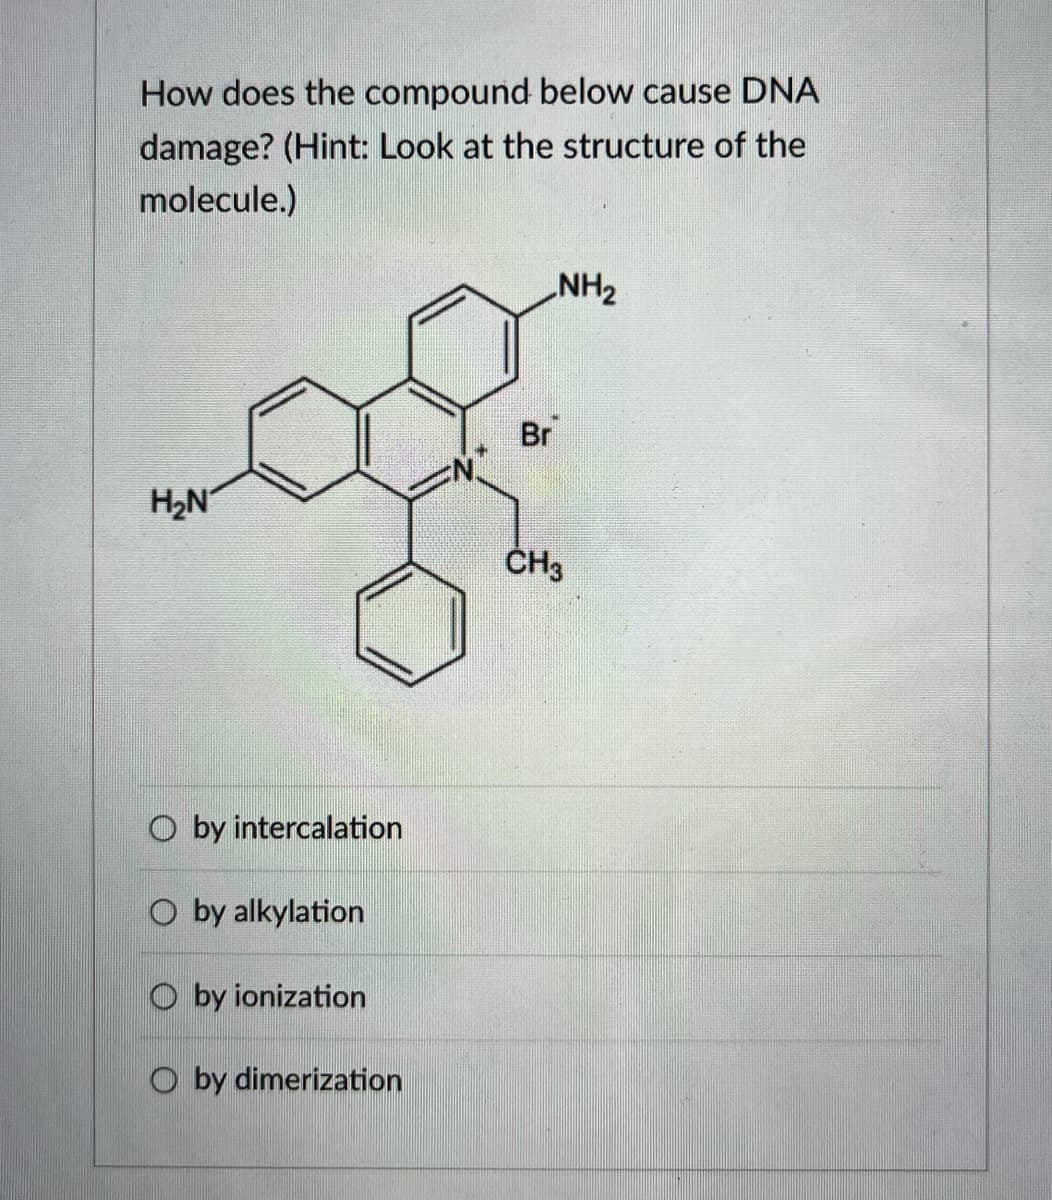 How does the compound below cause DNA
damage? (Hint: Look at the structure of the
molecule.)
NH₂
Br
H₂N²
CH3
O by intercalation
O by alkylation
O by ionization
Oby dimerization